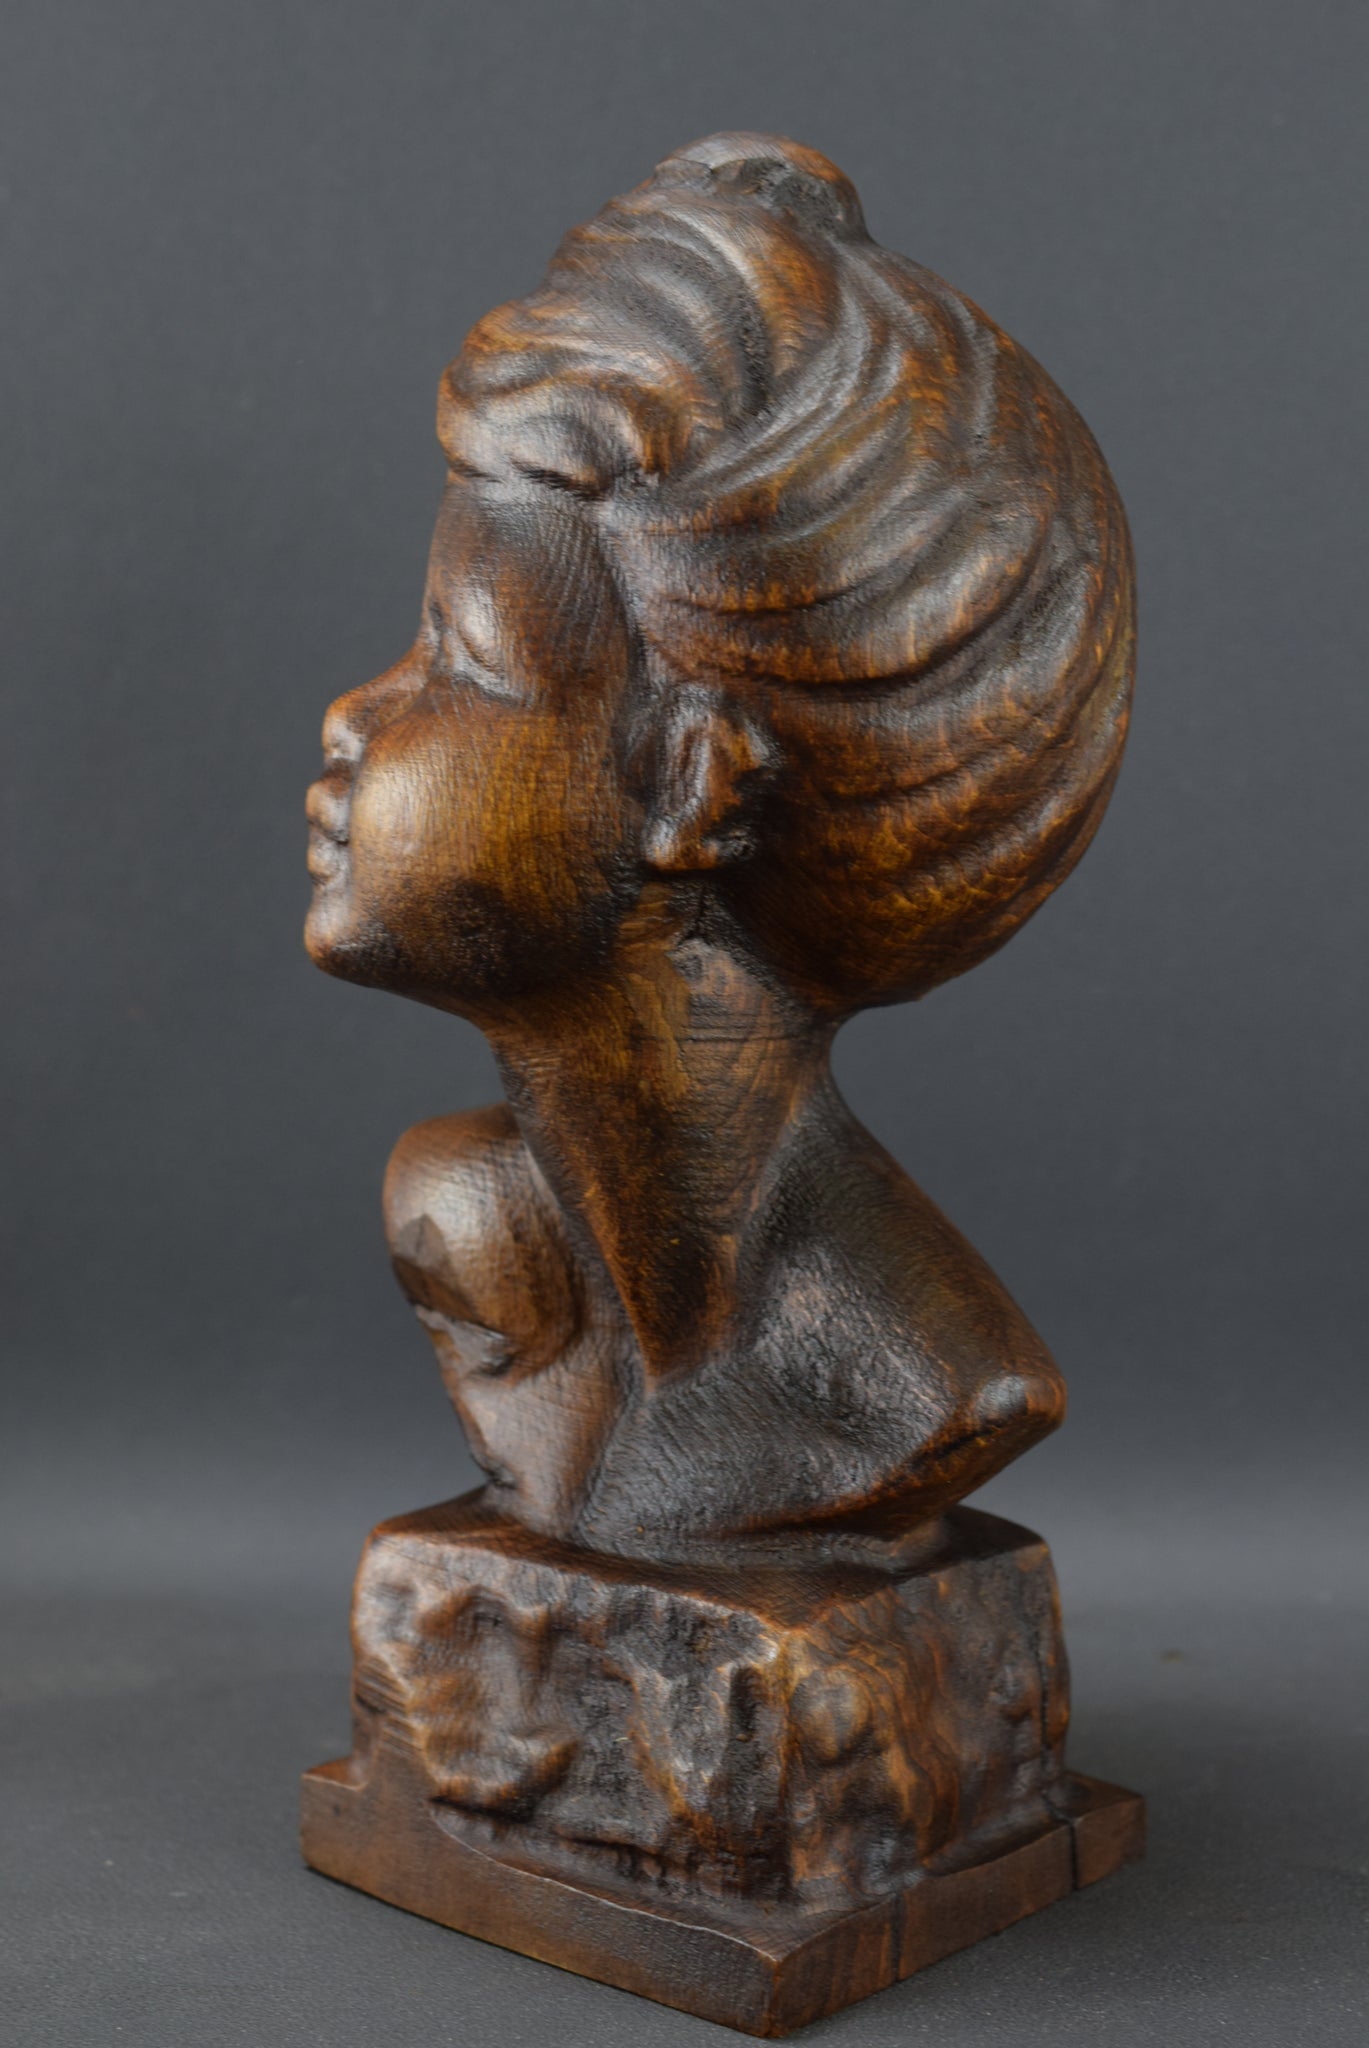 Carved Wood Bust